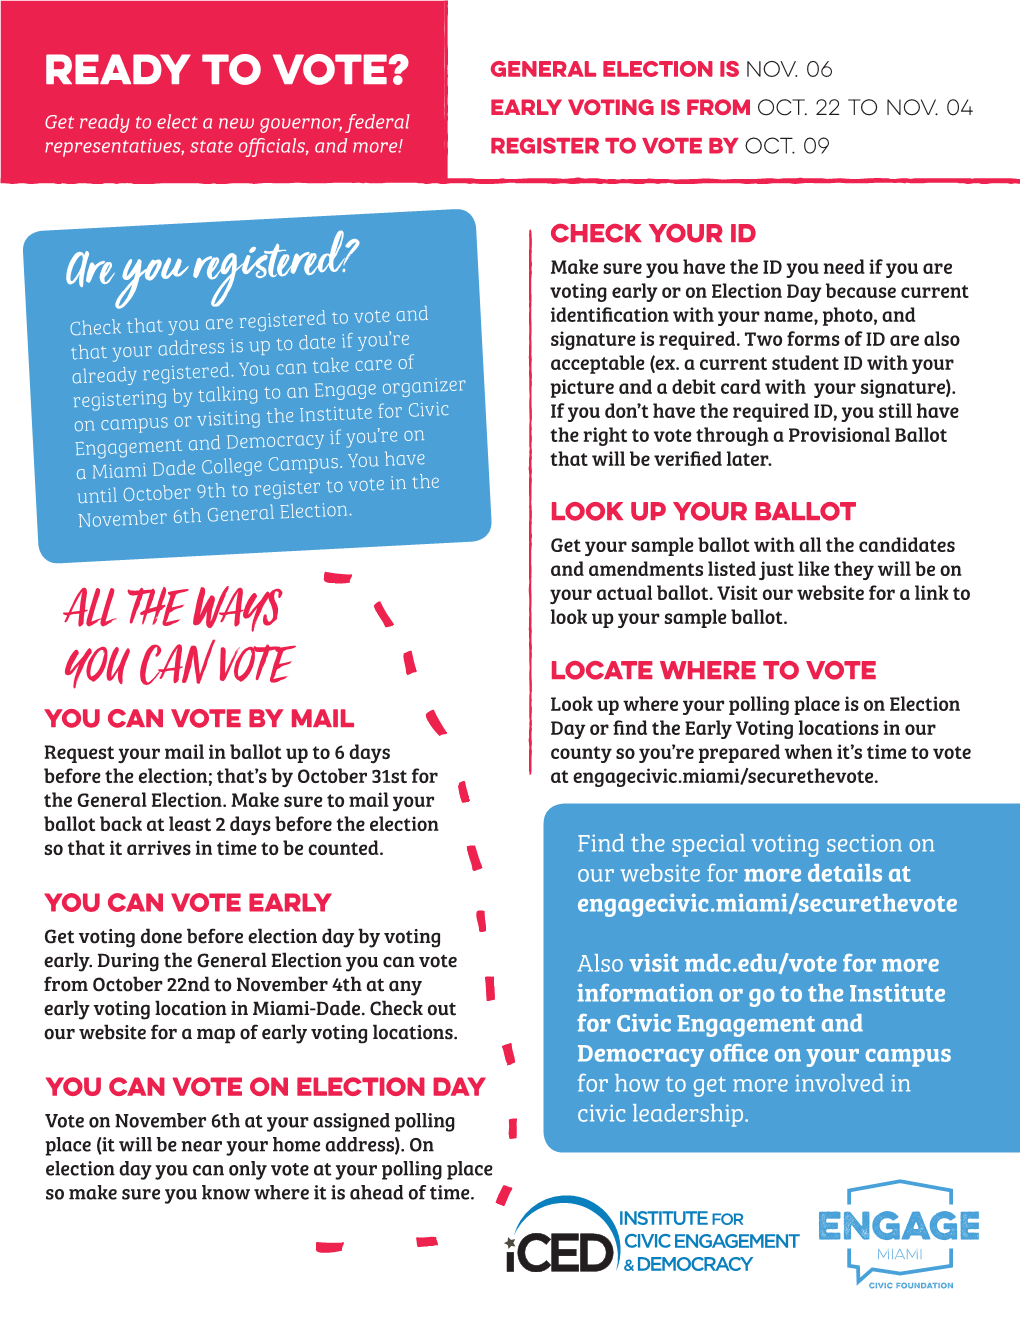 All the Ways You Can Vote